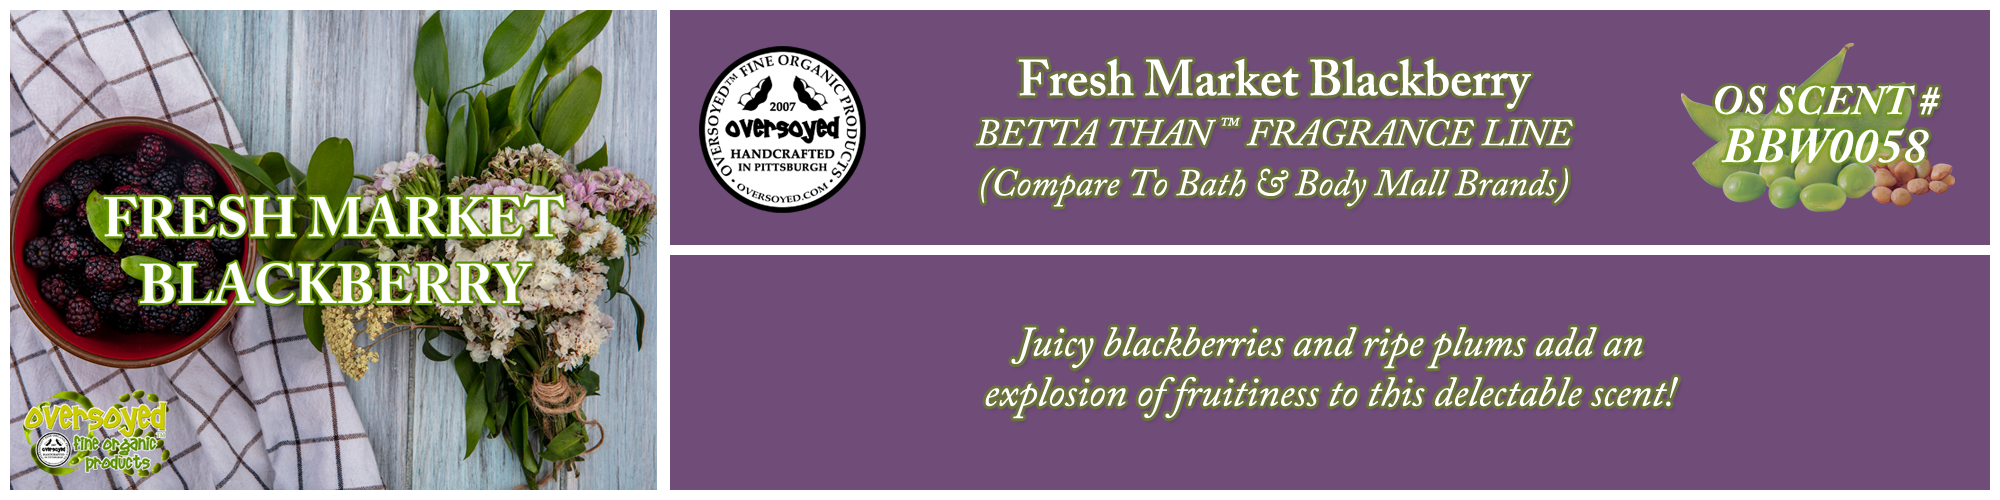 Fresh Market Blackberry Handcrafted Products Collection